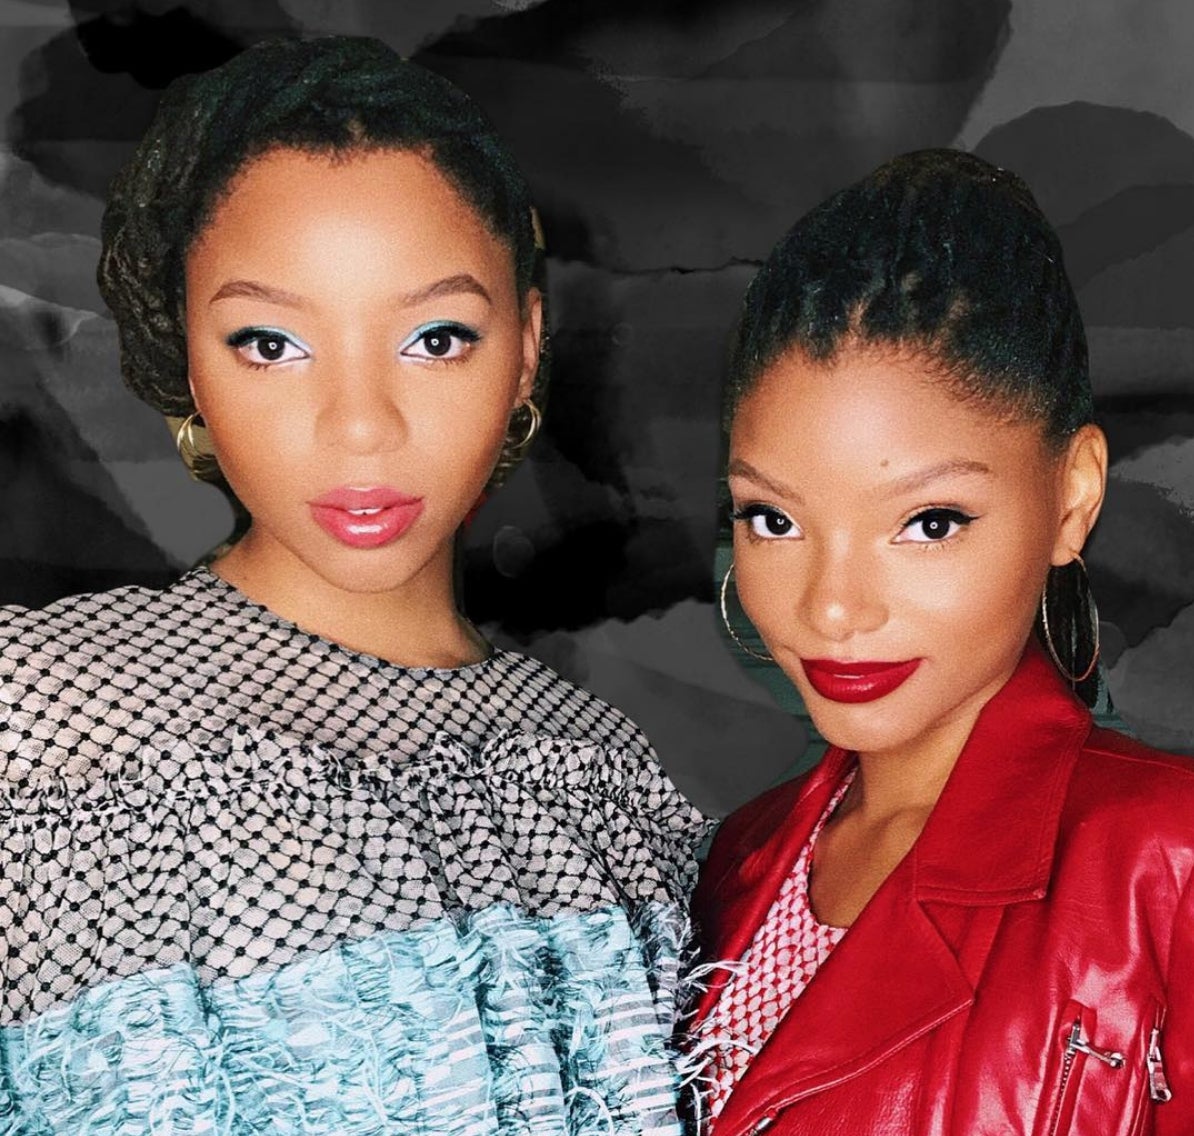 ESSENCE 25 Most Stylish: Chloe And Halle Are As Fierce On The Red Carpet As They Are In The Studio